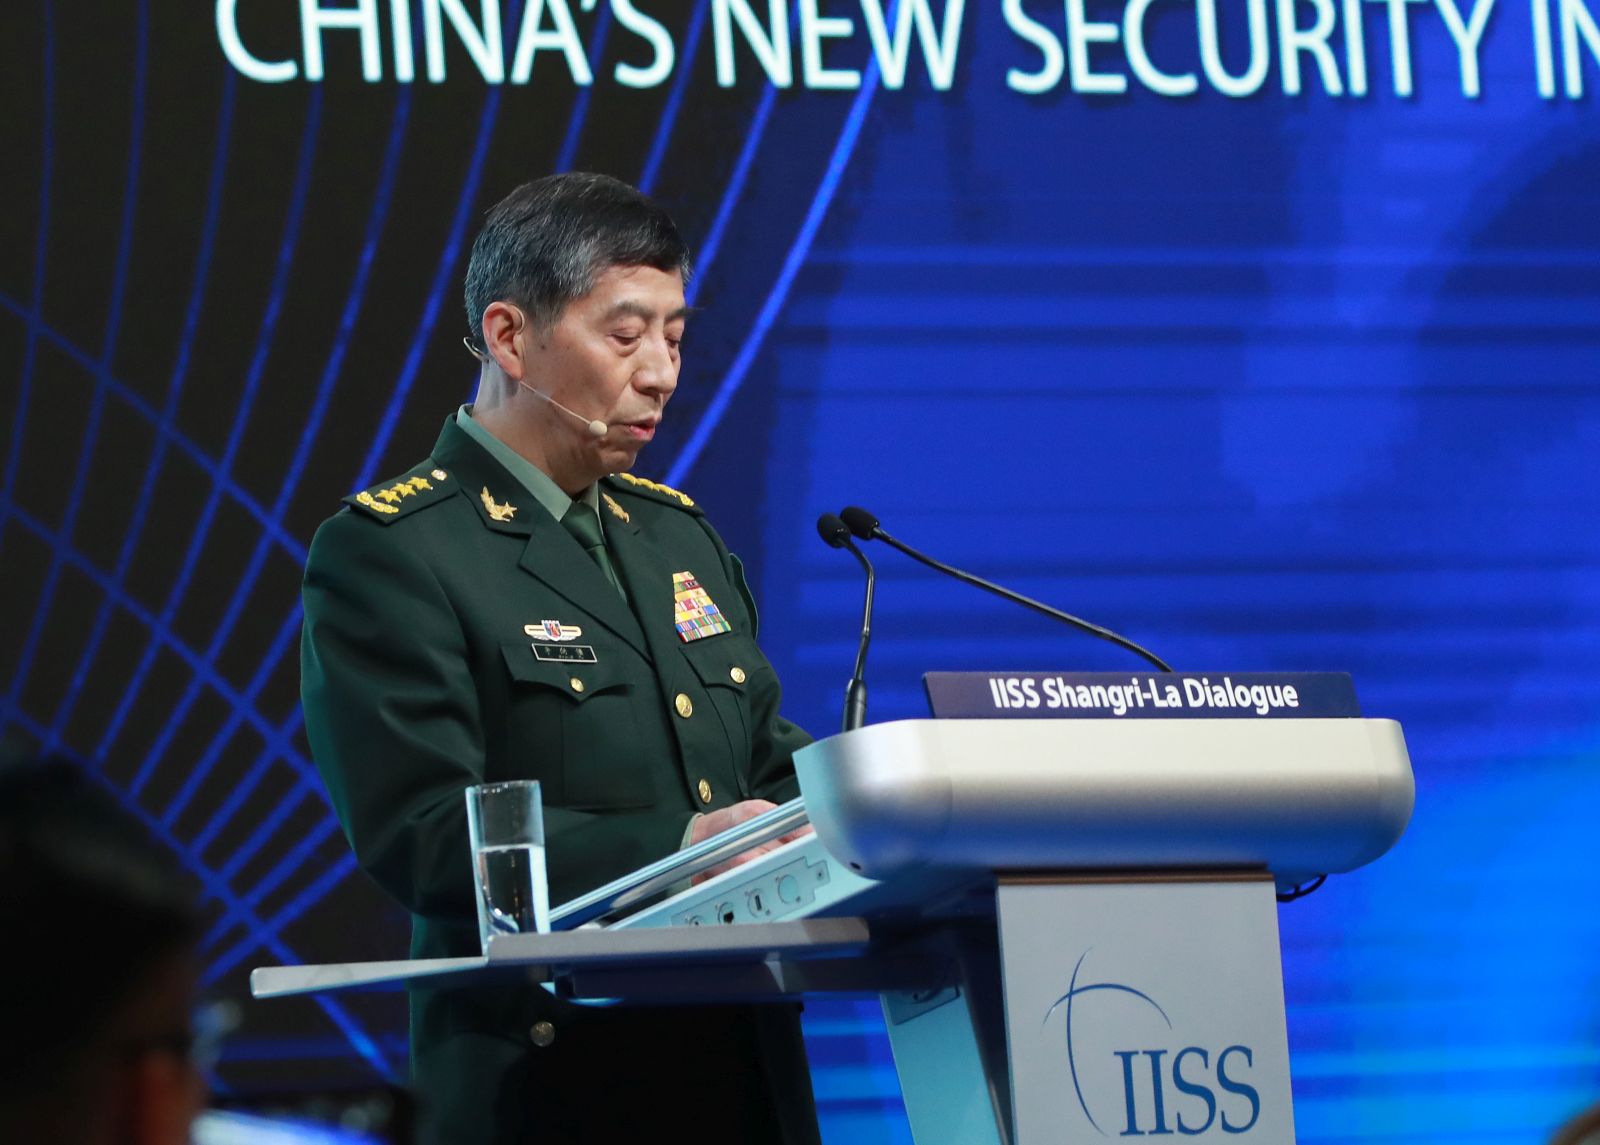 epa10671809 Chinese State Councilor and Minister of National Defence General Li Shangfu delivers his speech during a plenary session of the International Institute for Strategic Studies (IISS) Shangri-la Dialogue at the Shangri-la hotel in Singapore, 04 June 2023. Defense ministers and officials from 41 countries are gathered in the city state for the IISS Shangri-la Dialogue, an annual high level defence summit in the Asia Pacific region.  EPA/HOW HWEE YOUNG